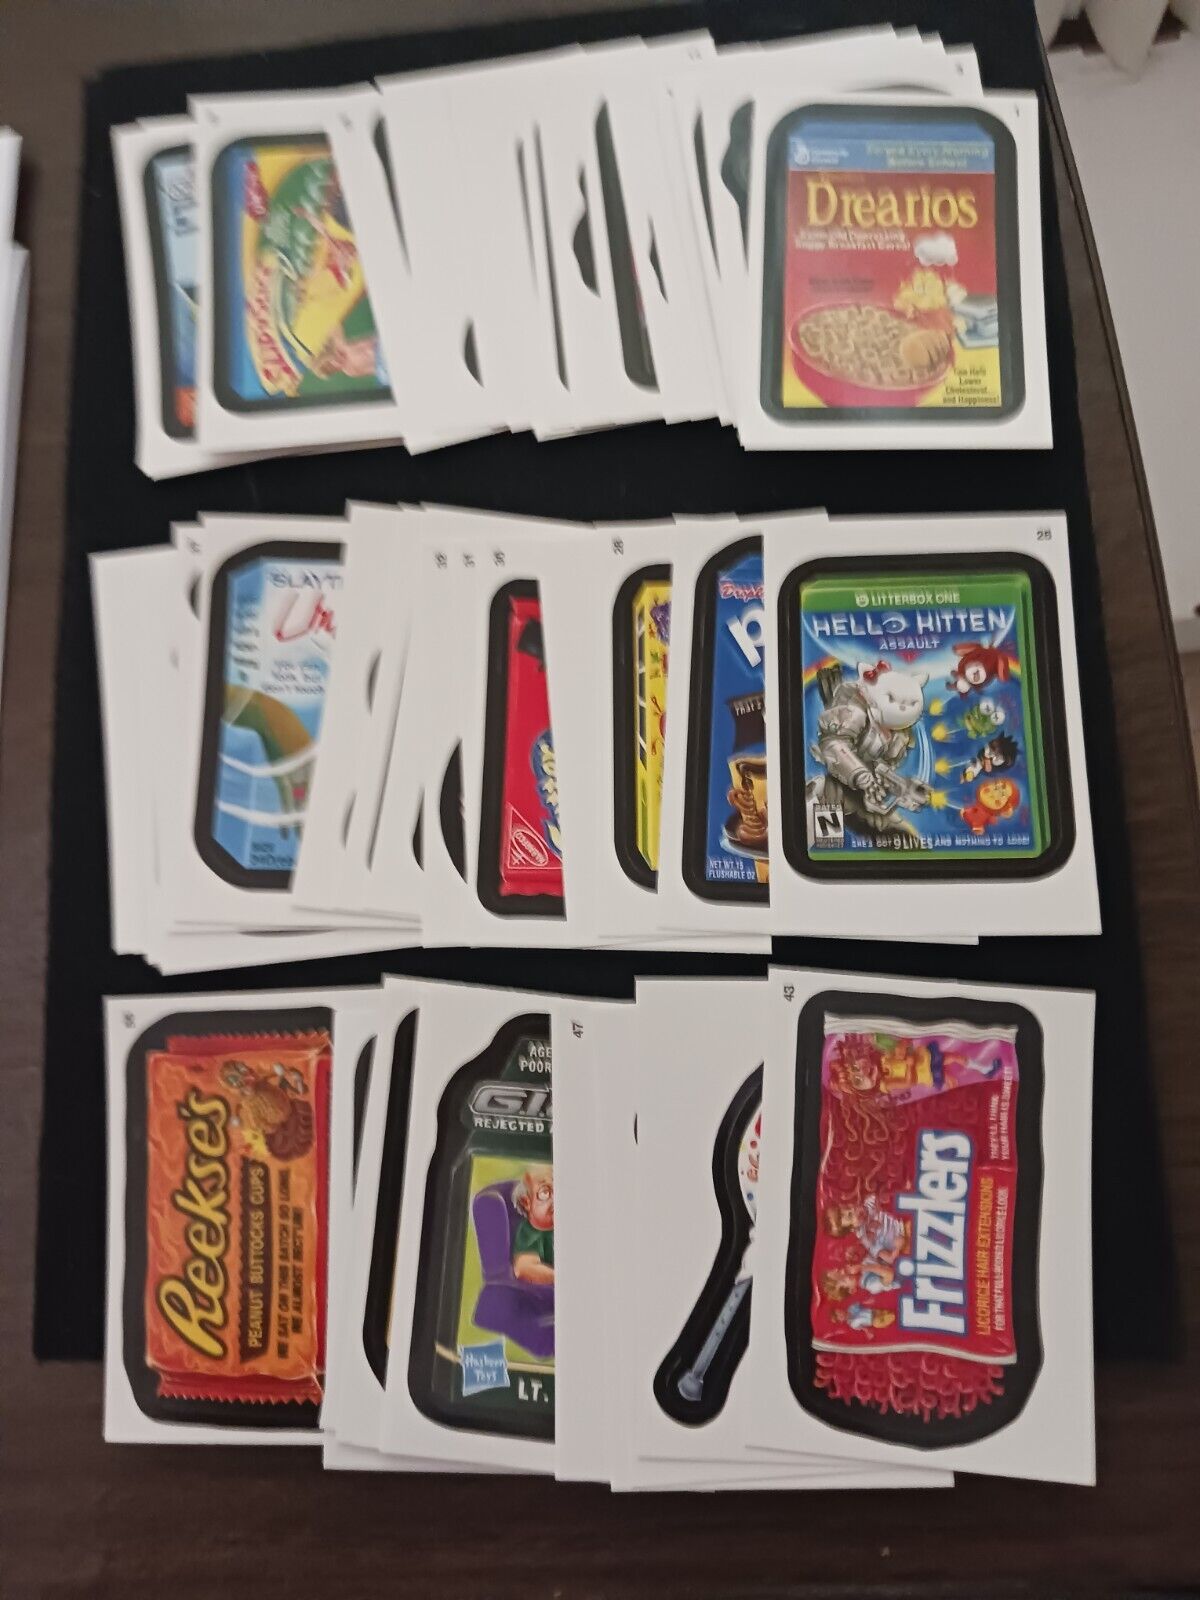 2014 TOPPS WACKY PACKAGES  Series 1 Complete 1-55 Mint- For 1 Complete Set Only